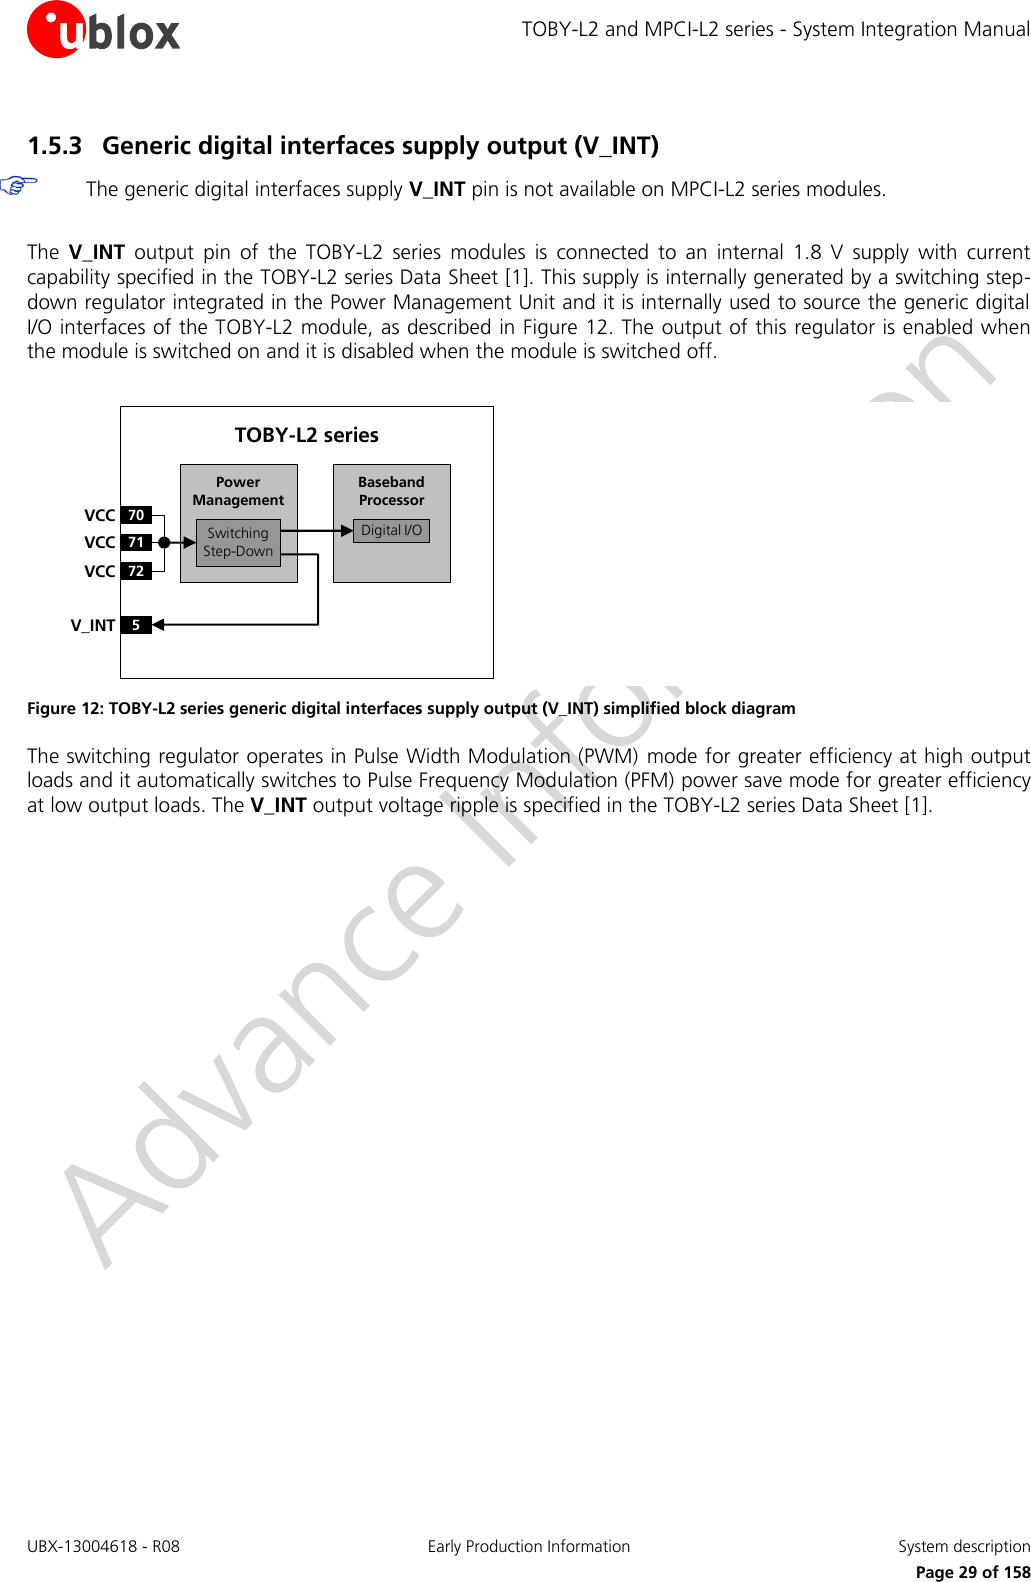 TOBY-L2 and MPCI-L2 series - System Integration Manual UBX-13004618 - R08  Early Production Information  System description     Page 29 of 158 1.5.3 Generic digital interfaces supply output (V_INT)   The generic digital interfaces supply V_INT pin is not available on MPCI-L2 series modules.  The  V_INT  output  pin  of  the  TOBY-L2  series modules  is  connected  to  an  internal  1.8  V  supply  with  current capability specified in the TOBY-L2 series Data Sheet [1]. This supply is internally generated by a switching step-down regulator integrated in the Power Management Unit and it is internally used to source the generic digital I/O interfaces of the TOBY-L2 module, as described in Figure 12. The output of this regulator is enabled when the module is switched on and it is disabled when the module is switched off.  Baseband Processor70VCC71VCC72VCC5V_INTSwitchingStep-DownPower ManagementTOBY-L2 seriesDigital I/O Figure 12: TOBY-L2 series generic digital interfaces supply output (V_INT) simplified block diagram The switching regulator operates in Pulse Width Modulation (PWM)  mode for greater efficiency at high output loads and it automatically switches to Pulse Frequency Modulation (PFM) power save mode for greater efficiency at low output loads. The V_INT output voltage ripple is specified in the TOBY-L2 series Data Sheet [1].  